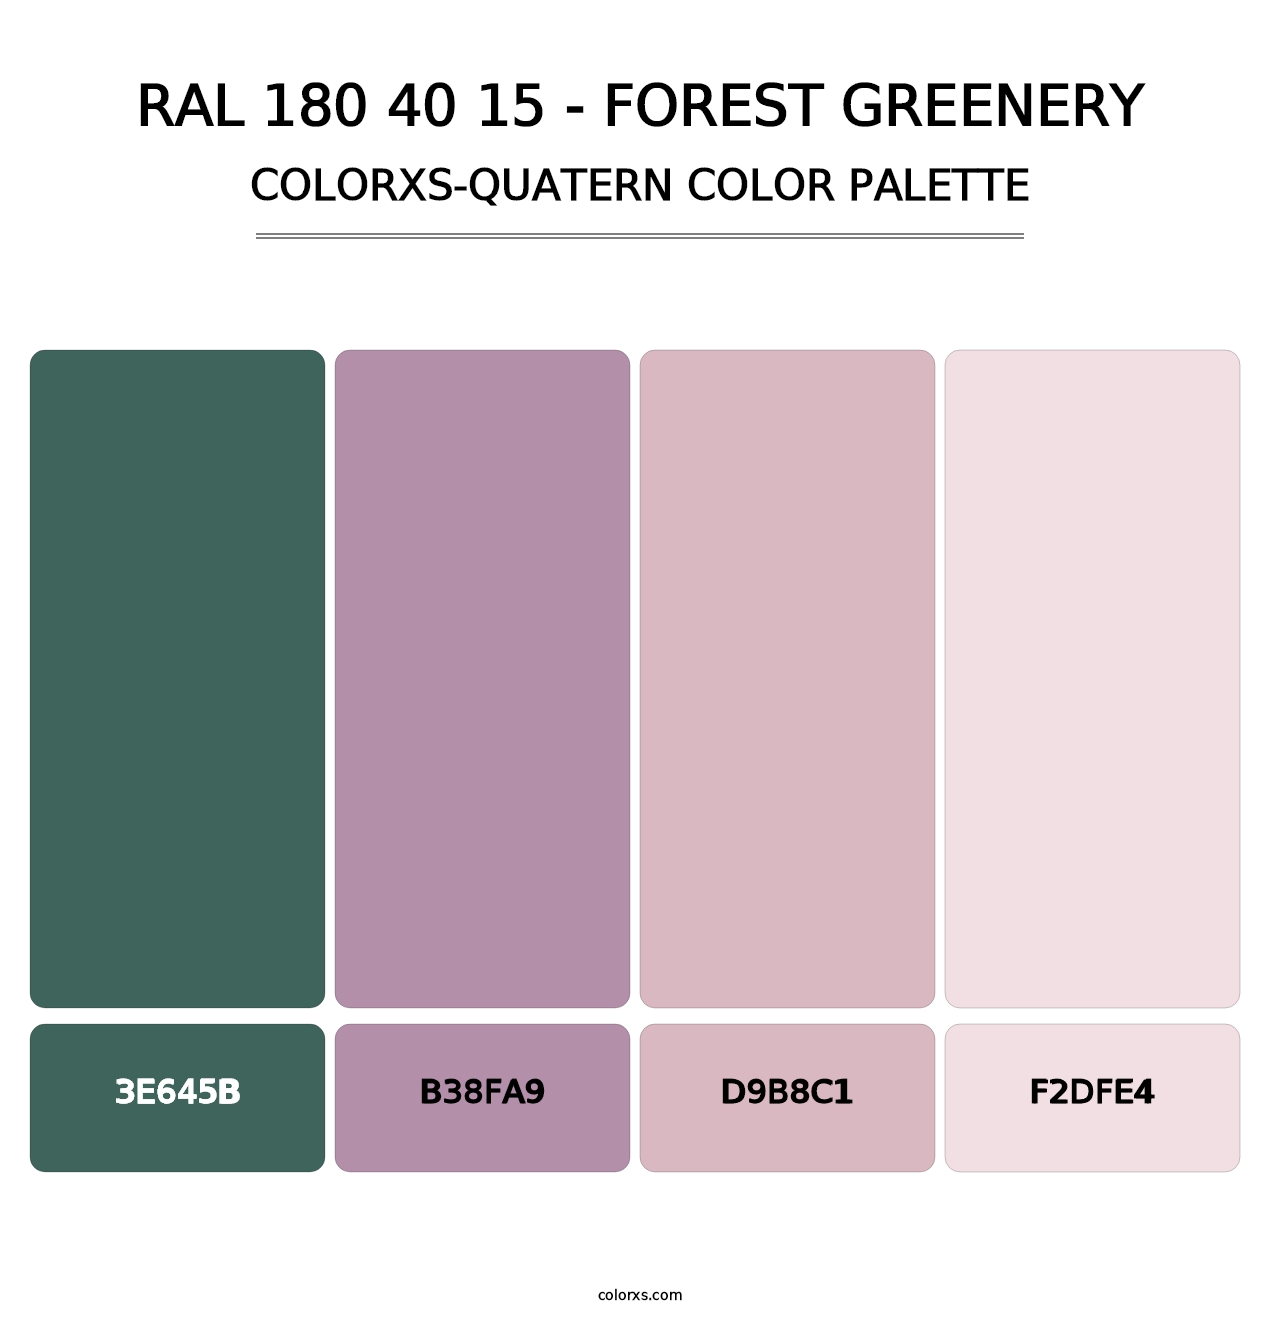 RAL 180 40 15 - Forest Greenery - Colorxs Quatern Palette